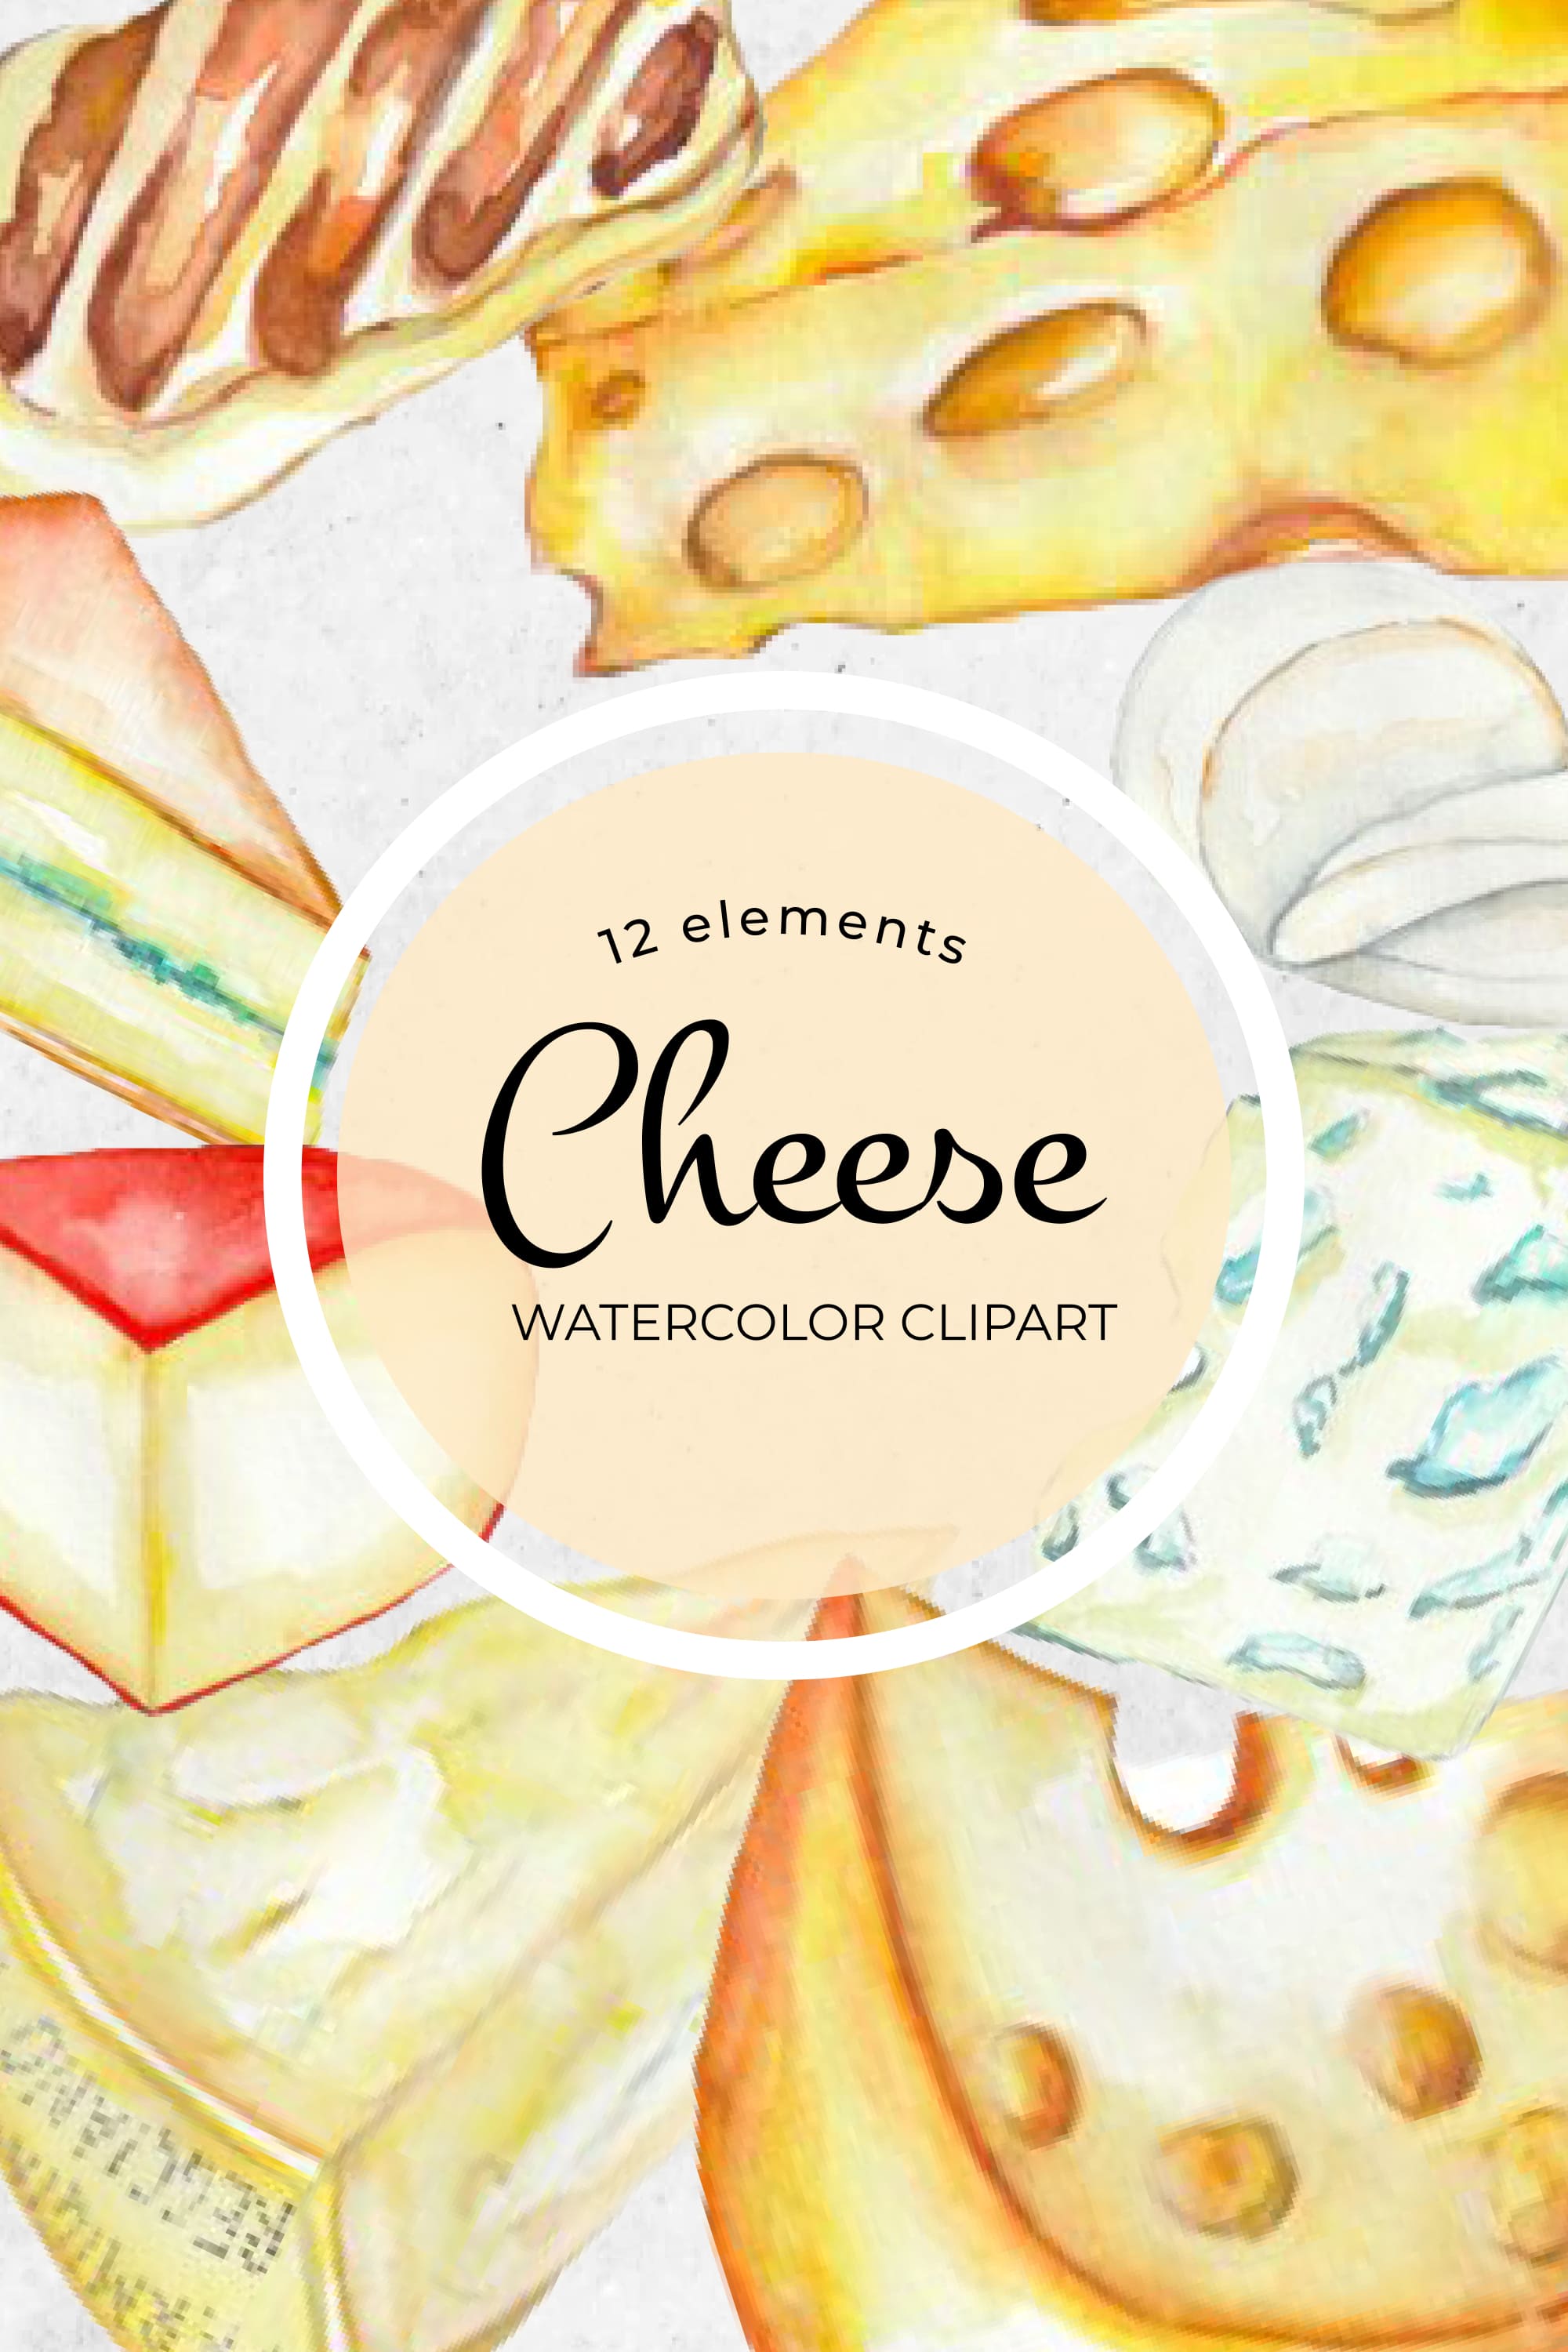 Collection of beautiful watercolor images of hard cheese.